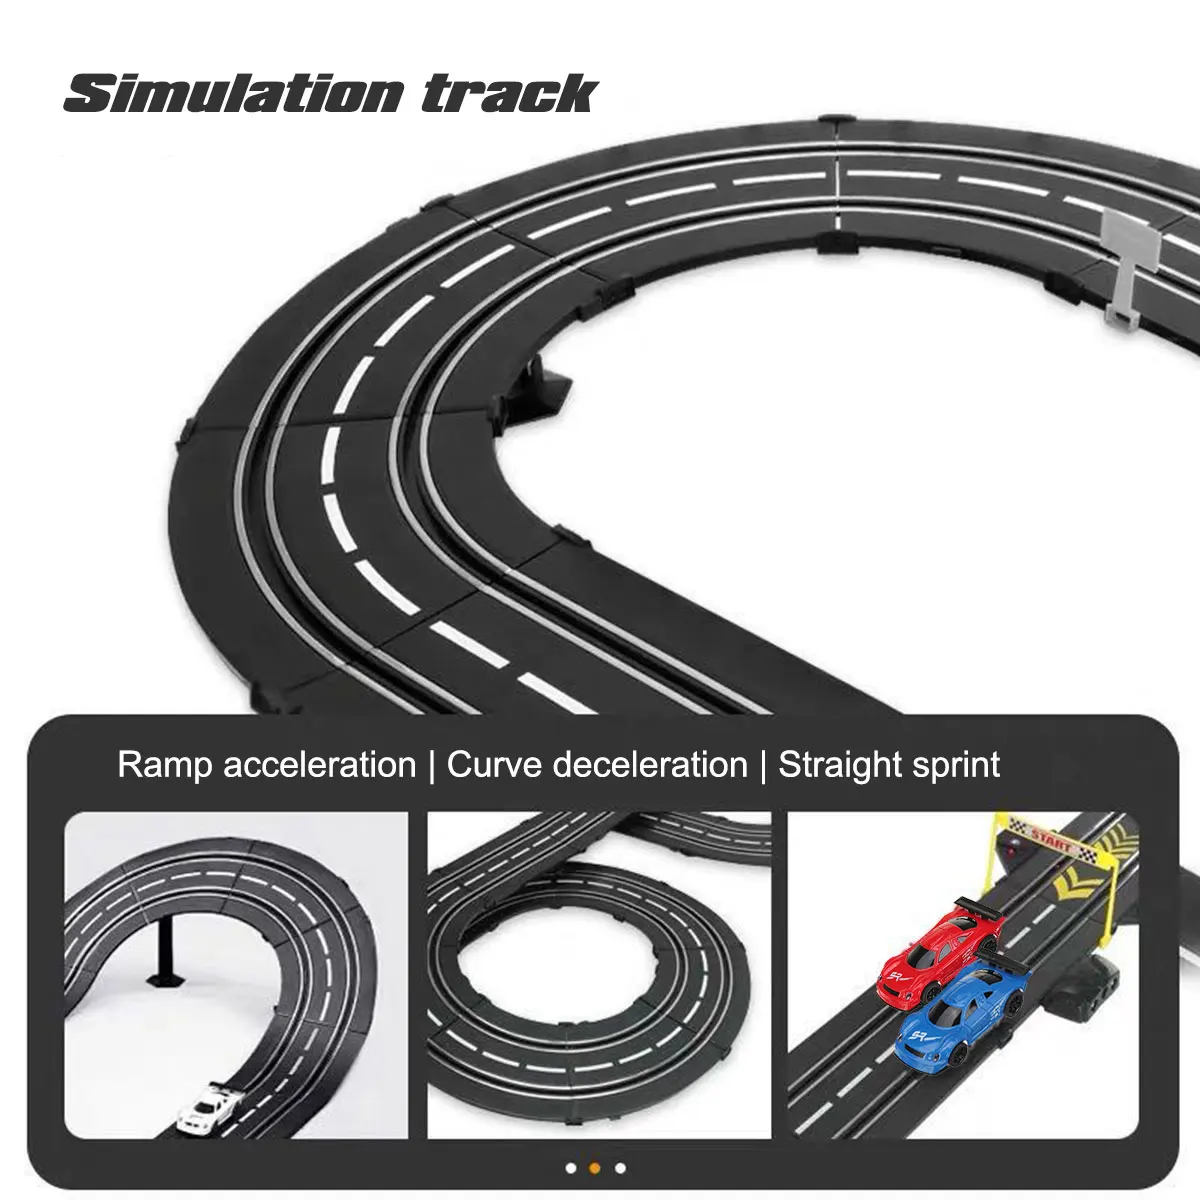 154pcs Electric Double Remote Control Car Racing Track Toy Railway Track Toy Set With Lights and Magnetic Base Railway Slot Car enlarge